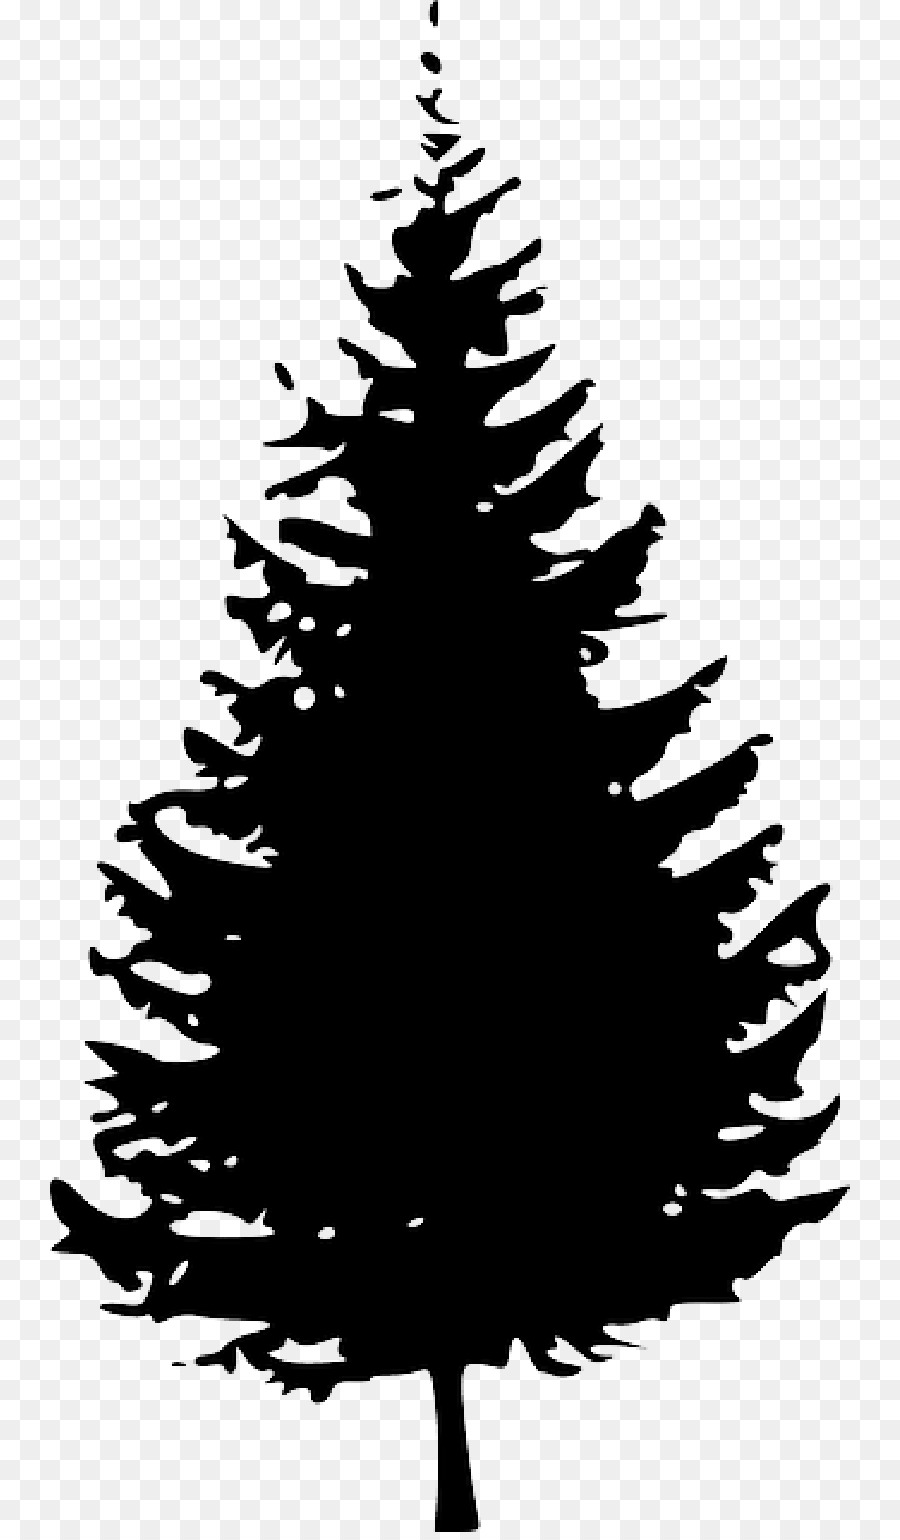 Clip art Pine Tree Fir Vector graphics - tree png download - 800*1532 - Free Transparent Pine png Download.